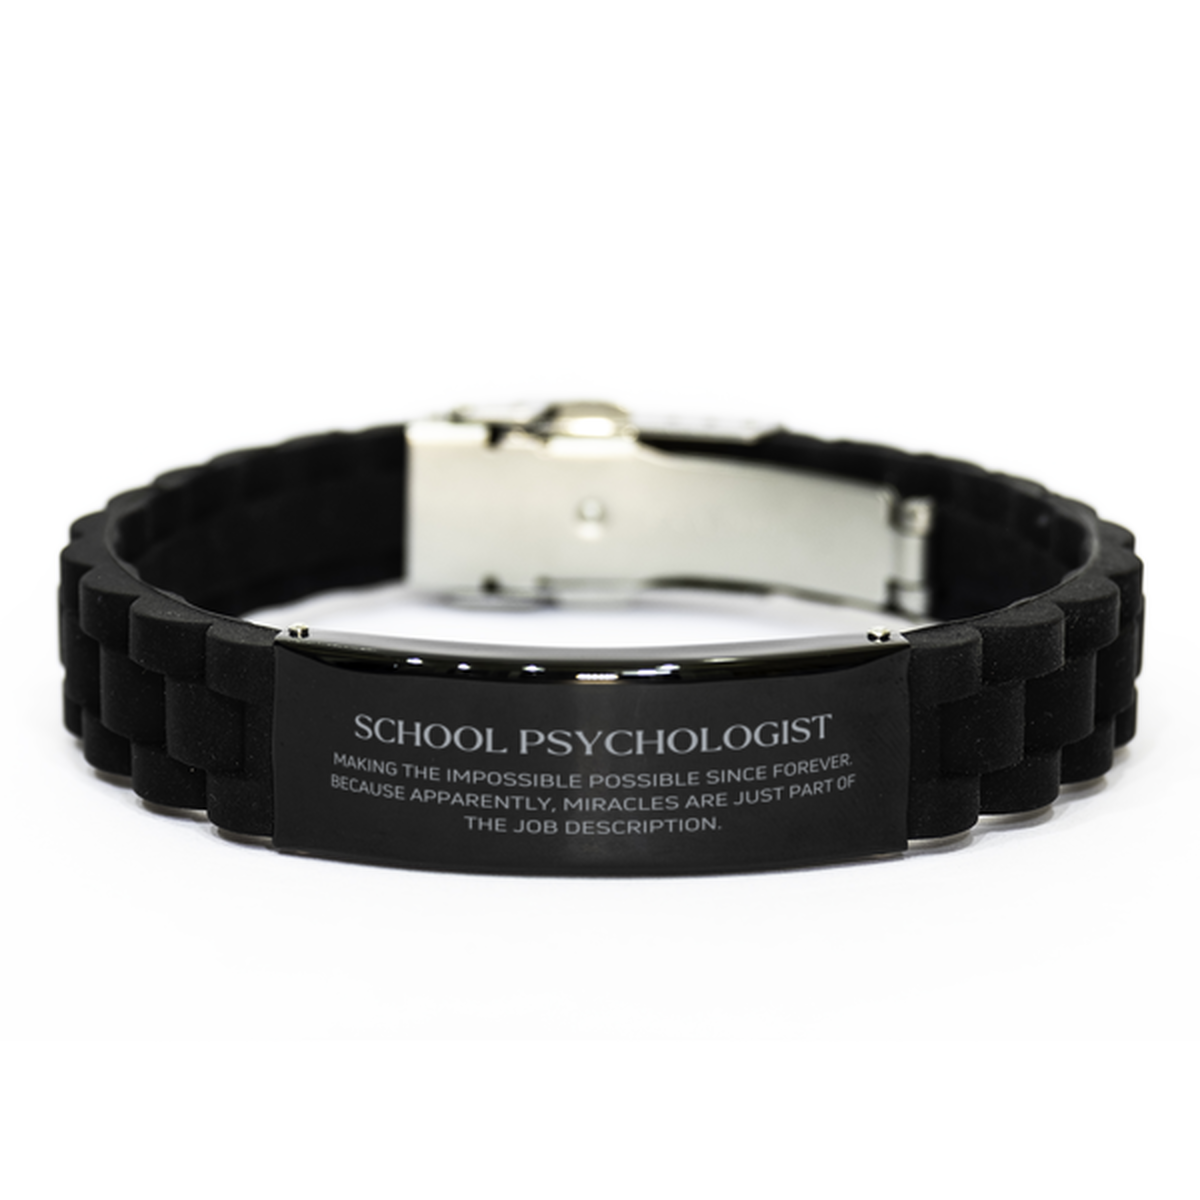 Funny School Psychologist Gifts, Miracles are just part of the job description, Inspirational Birthday Black Glidelock Clasp Bracelet For School Psychologist, Men, Women, Coworkers, Friends, Boss